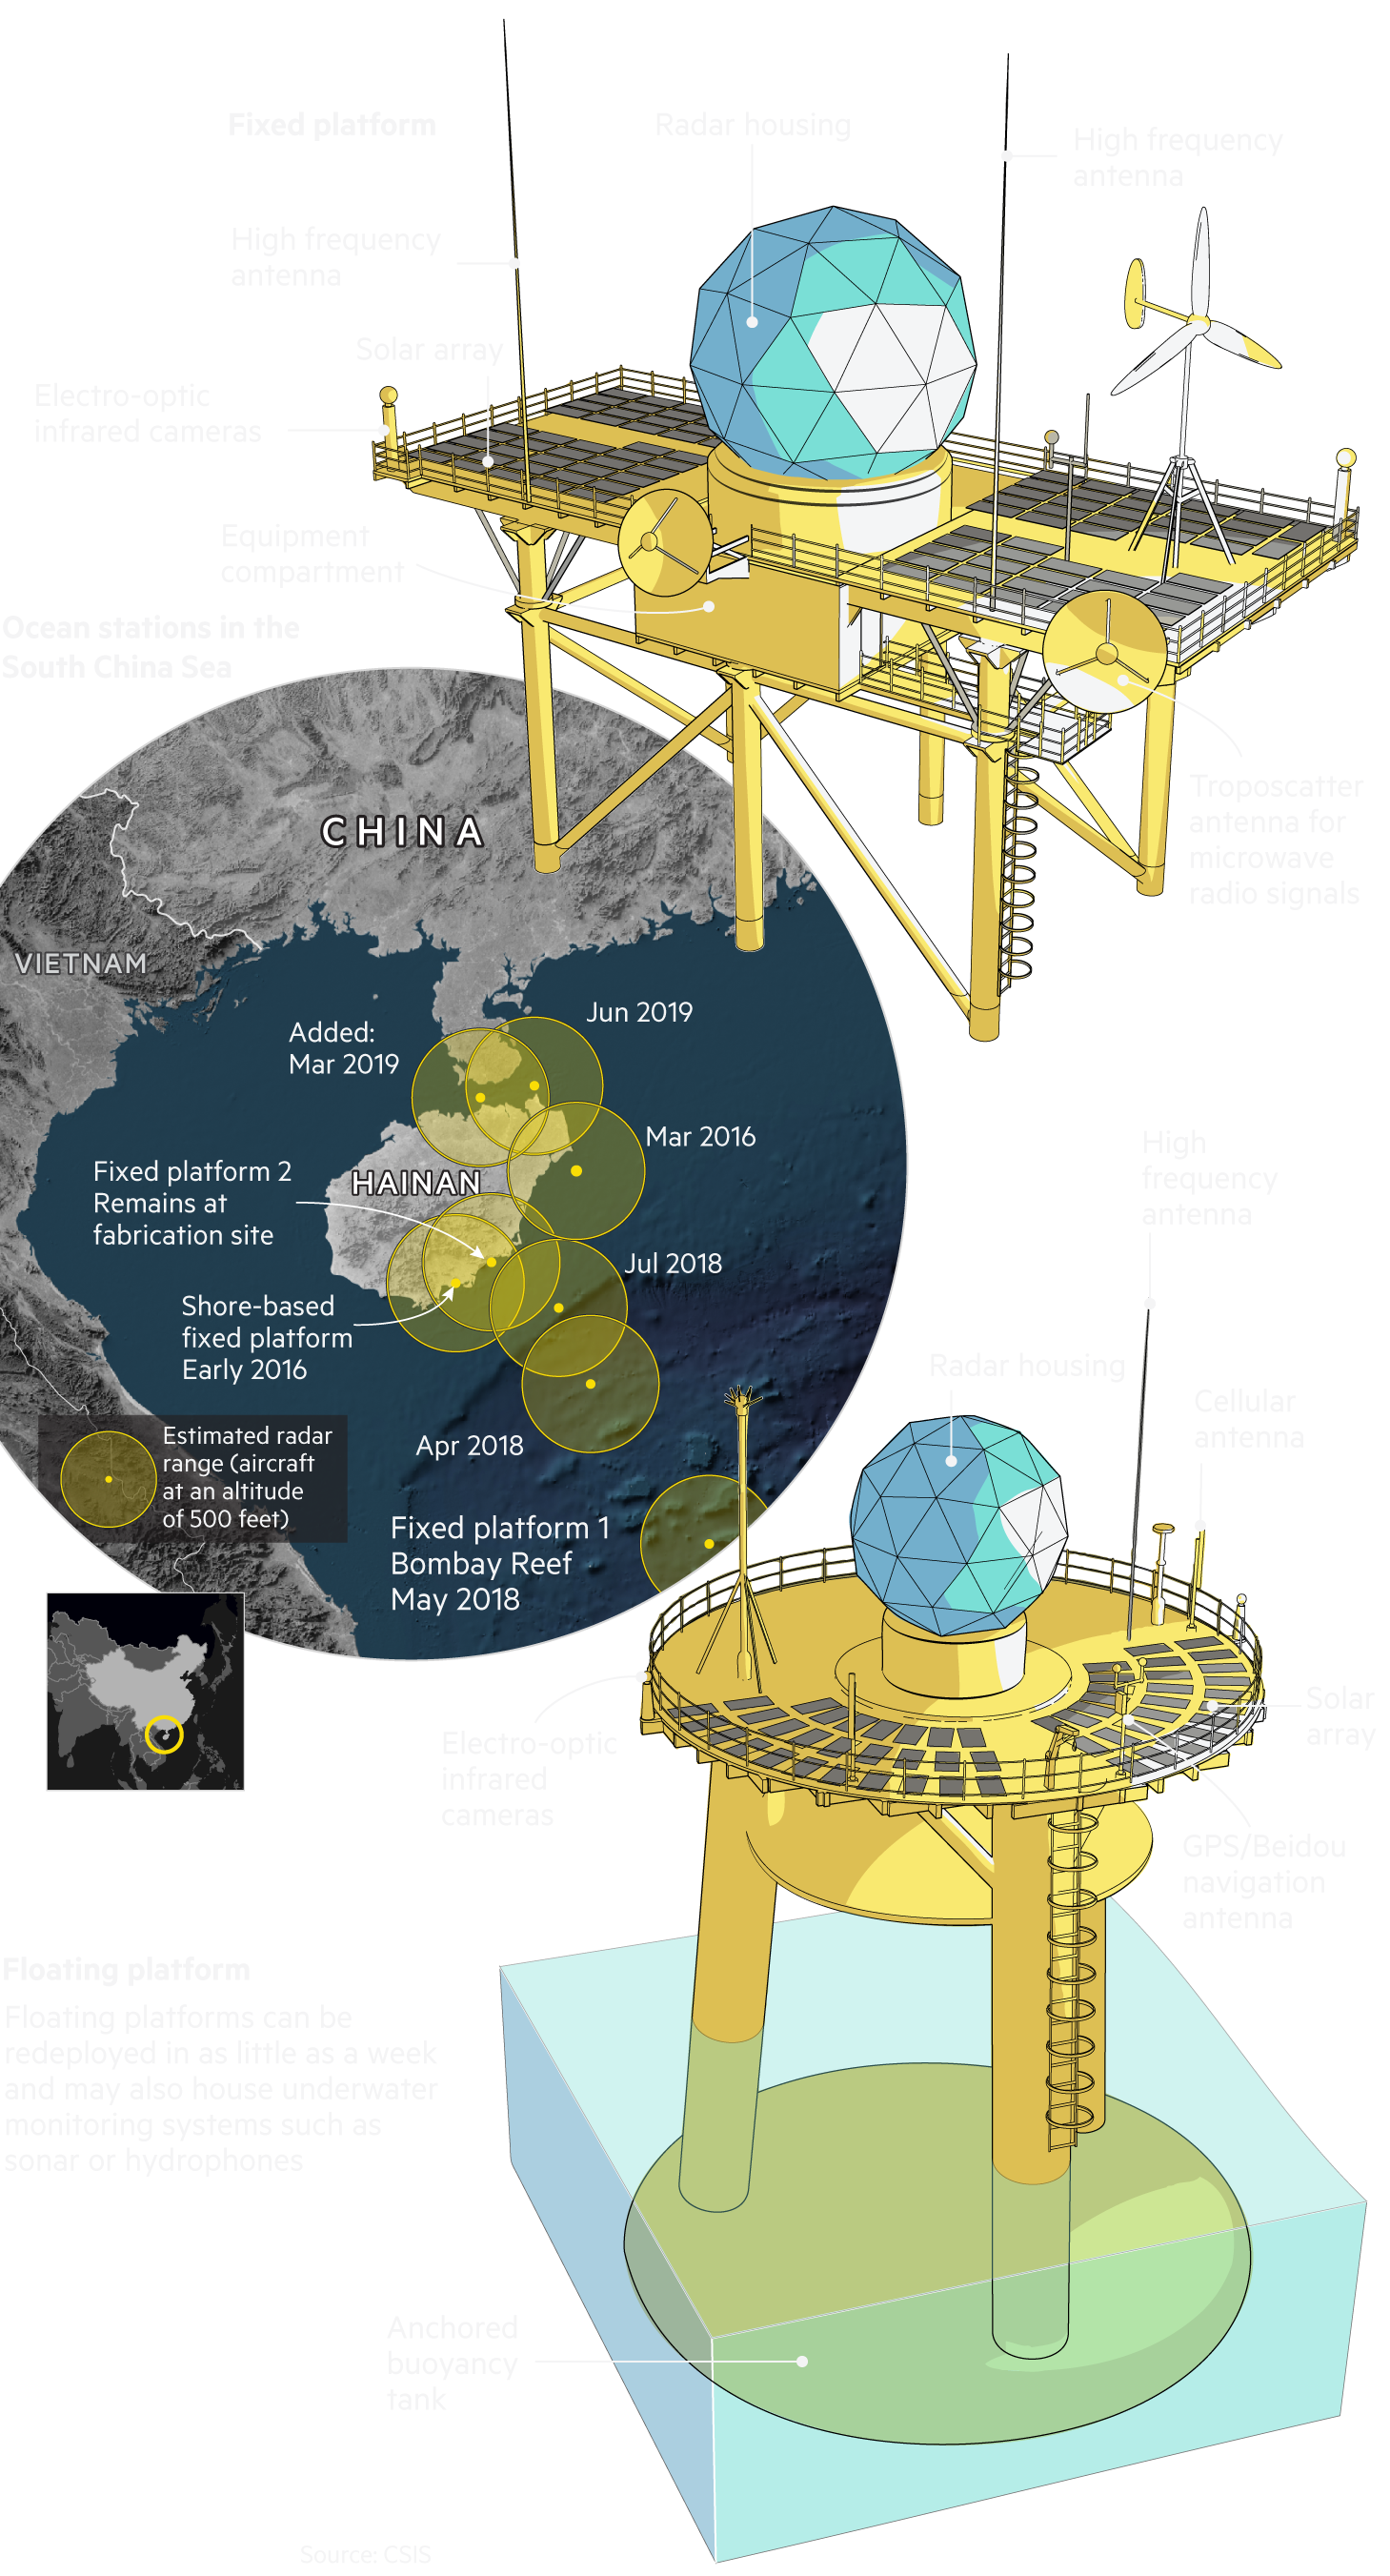 An infographic titled "China’s ocean communication stations". It annotates where China's ocean stations sit the the South China sea, mostly around the island of Hainan. Two diagrams then show how two kinds of platforms, 'fixed' and 'floating' operate. They are charged with solar panels, have navigation and cellular antennas, and infrared cameras. It annotates that they have a wide estimated radar range for aircrafts at an altitude of 500 feet.